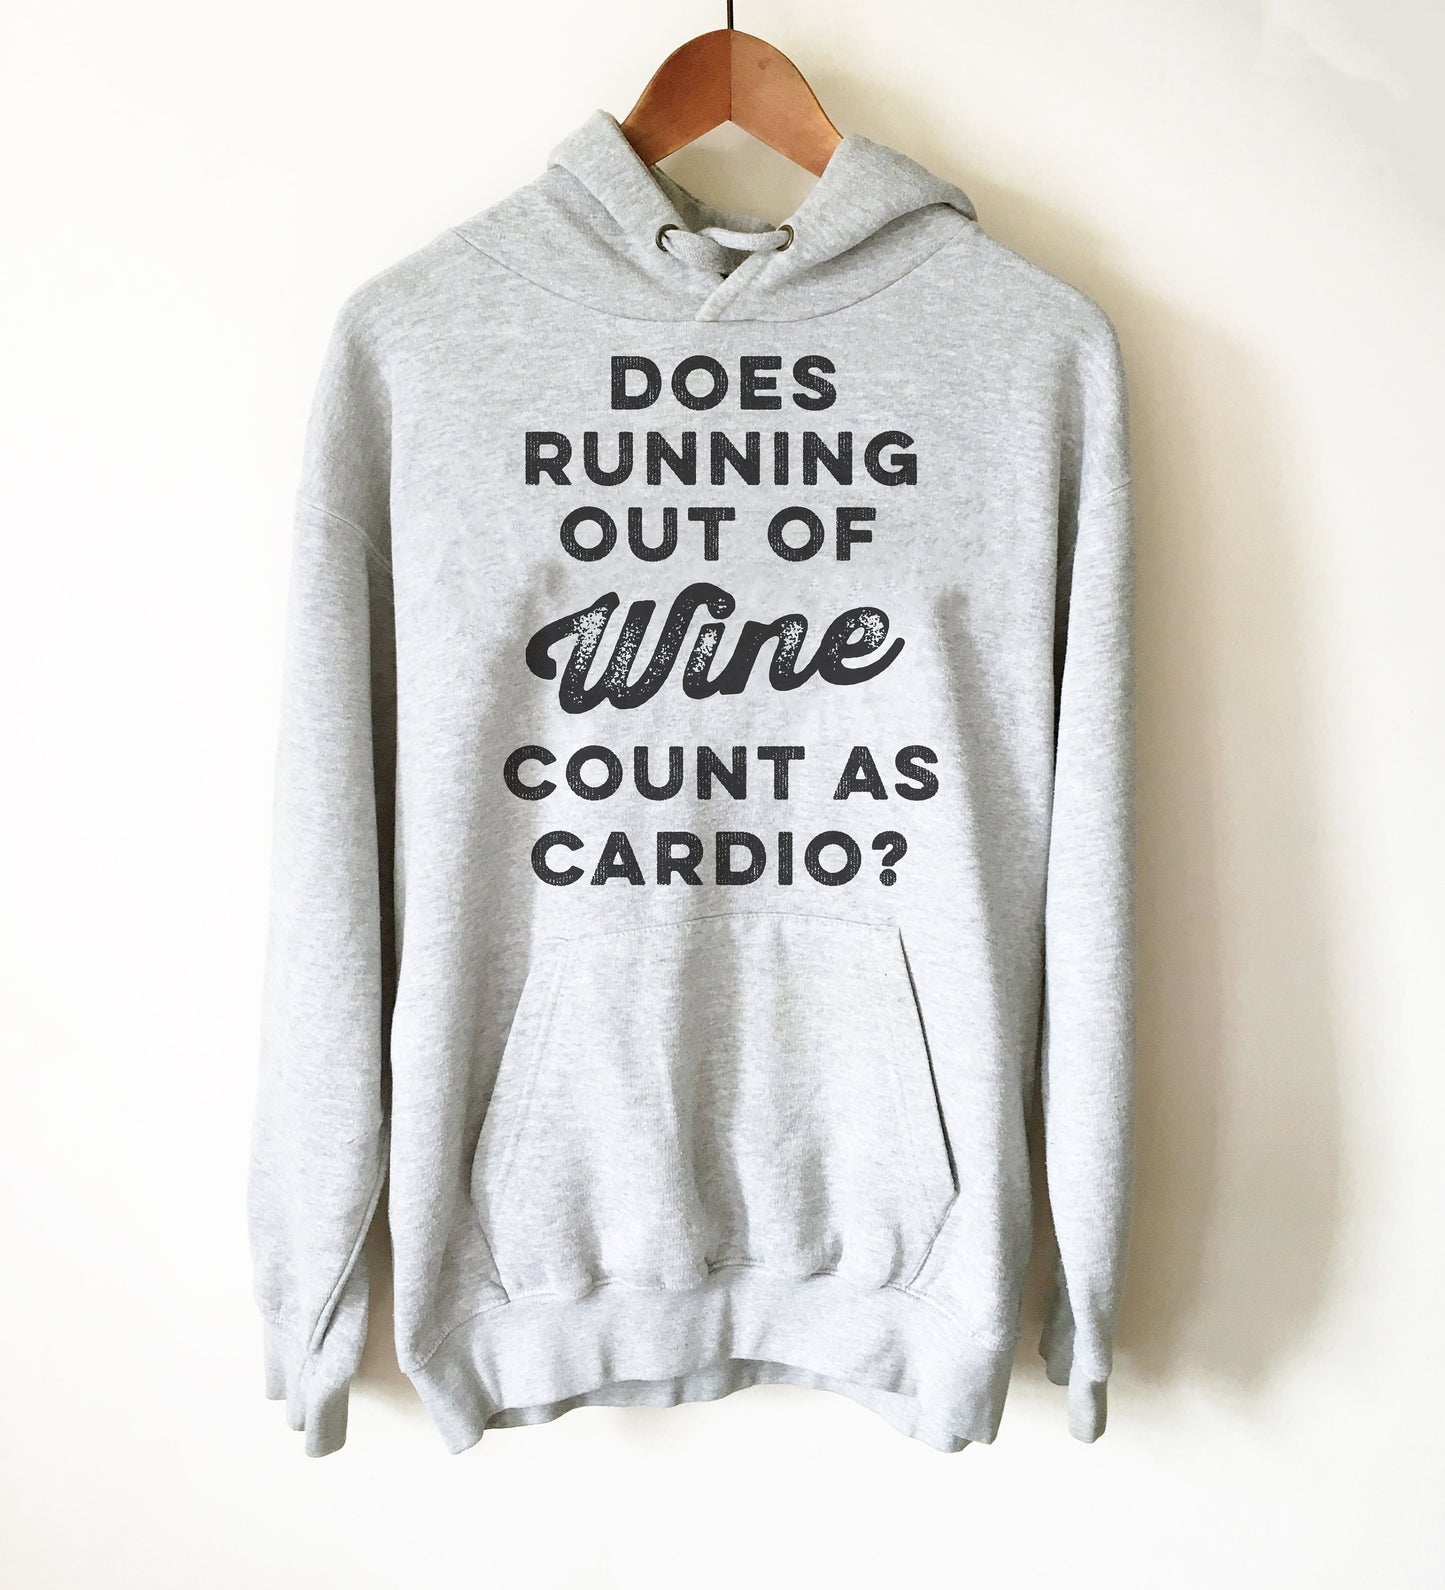 Does Running Out Of Wine Count As Cardio? Hoodie - Wine shirt, Funny wine shirt, Drinking shirt, Wine gift, Wine lover shirt, Wine Hoodie